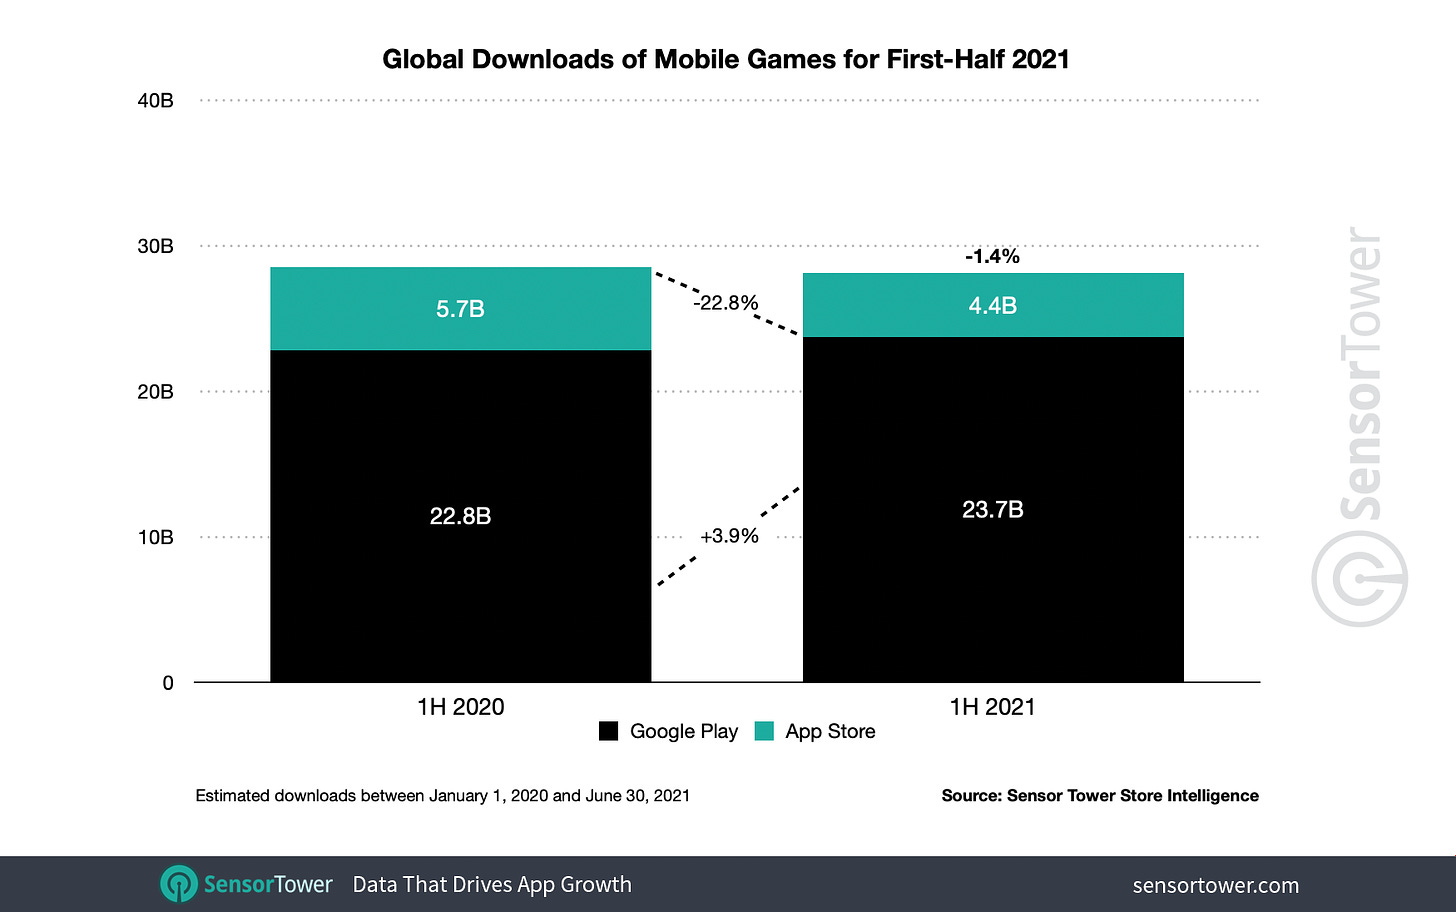 1H 2021 Mobile Game Downloads